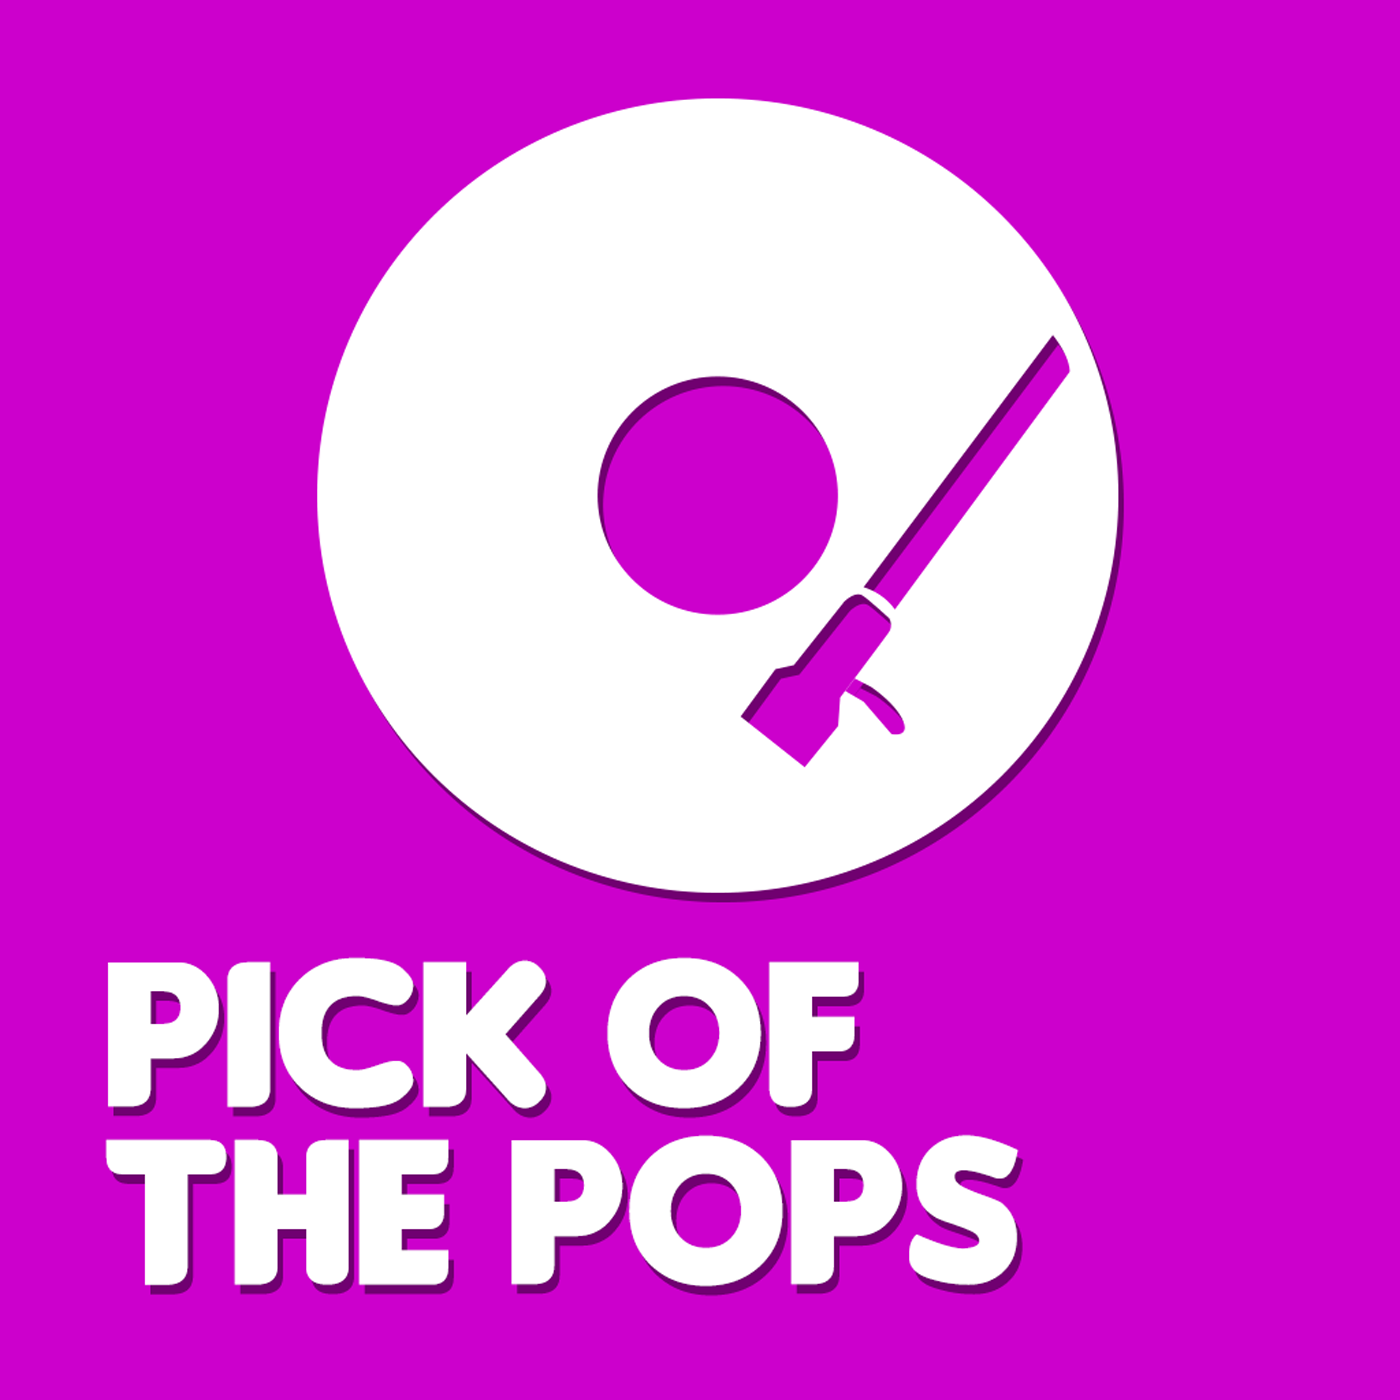 Pick of the Pops: The Best Songs of the 1970s